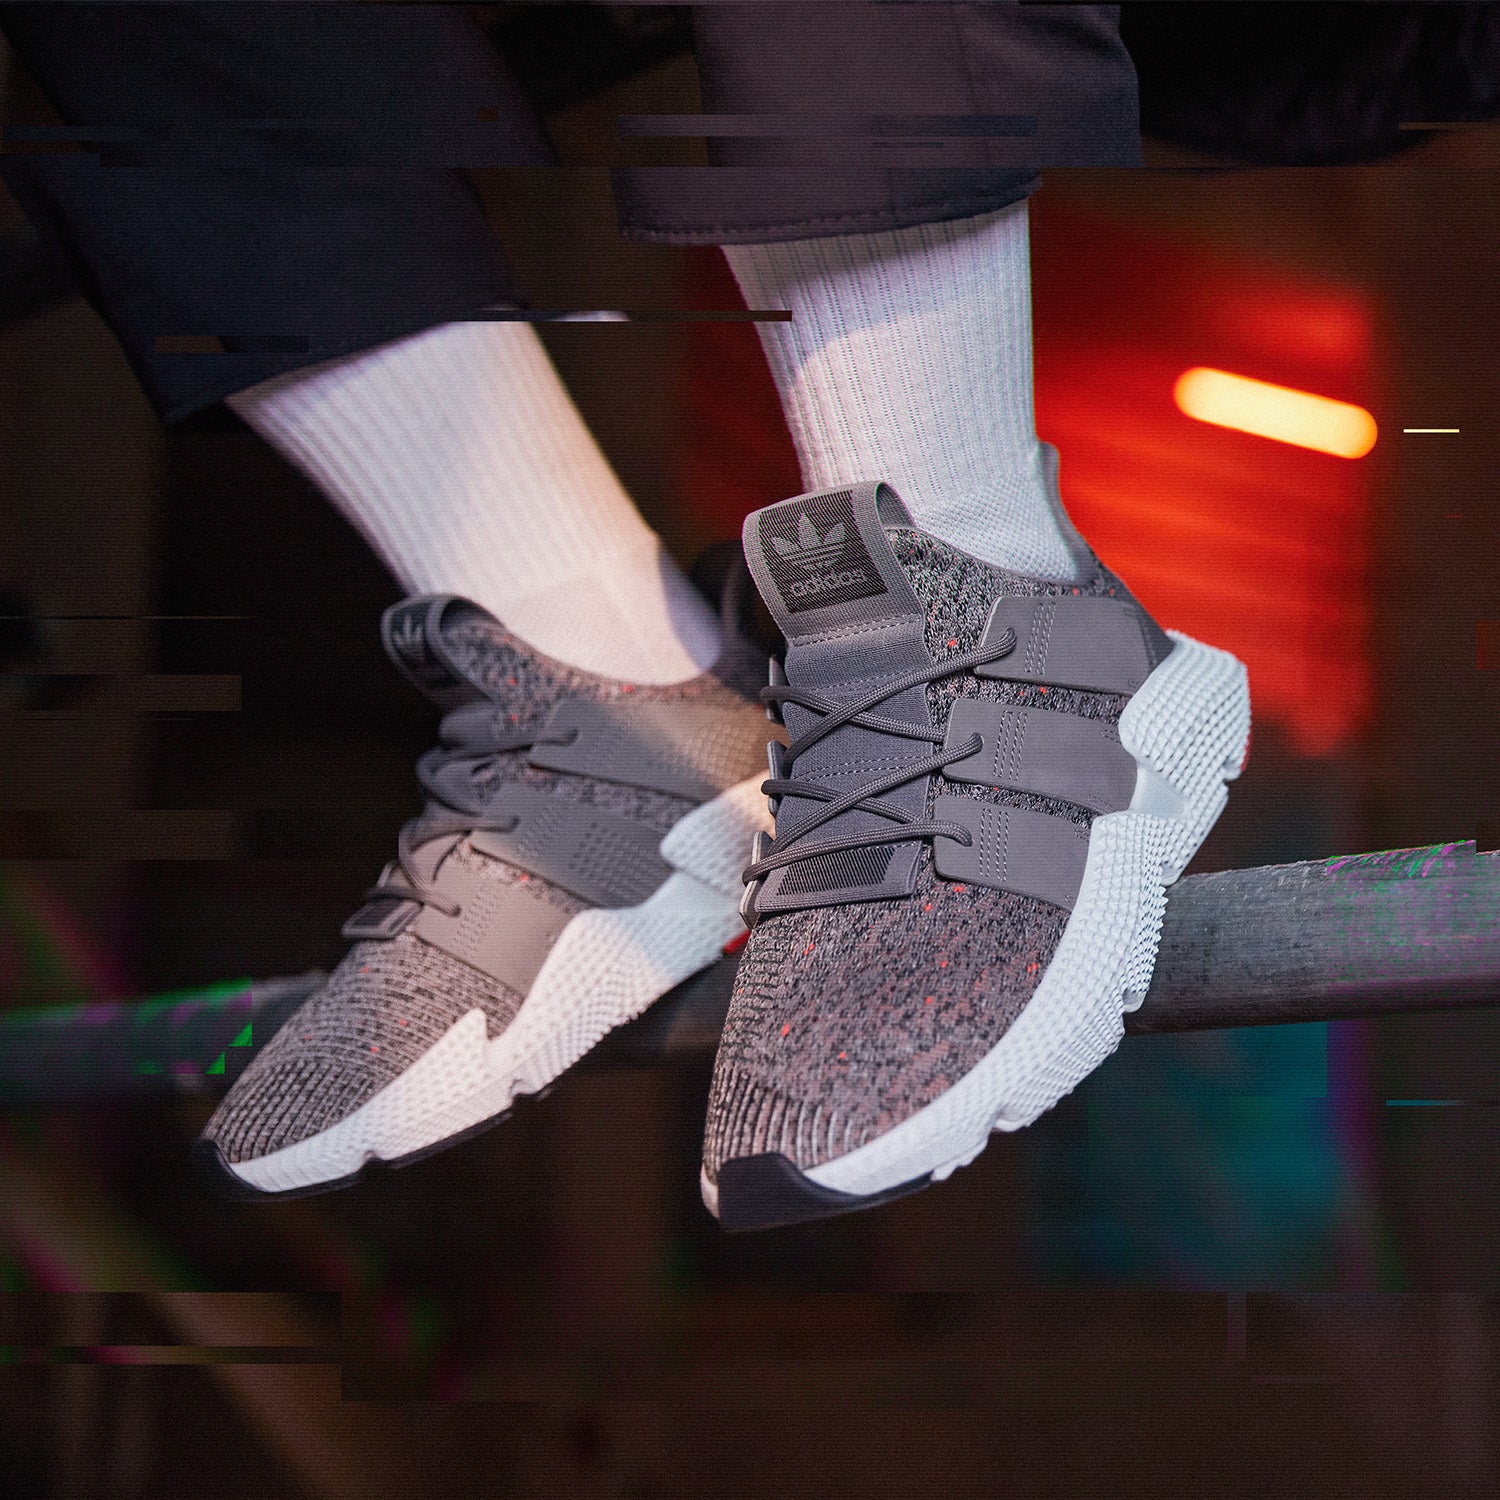 adidas prophere style